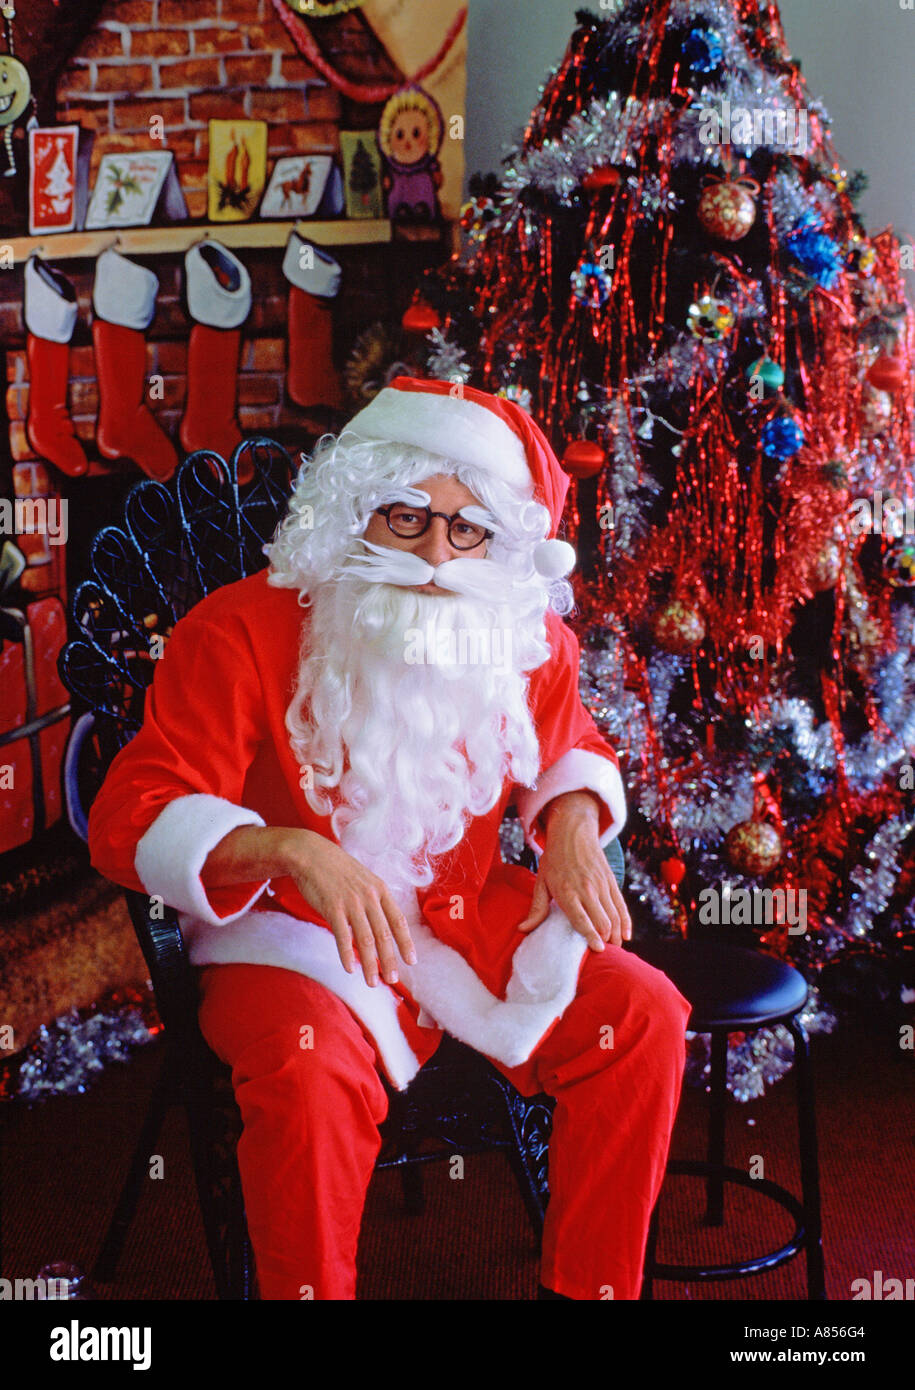 Santa Claus (Father Christmas) sitting in store setting by Christmas tree Stock Photo